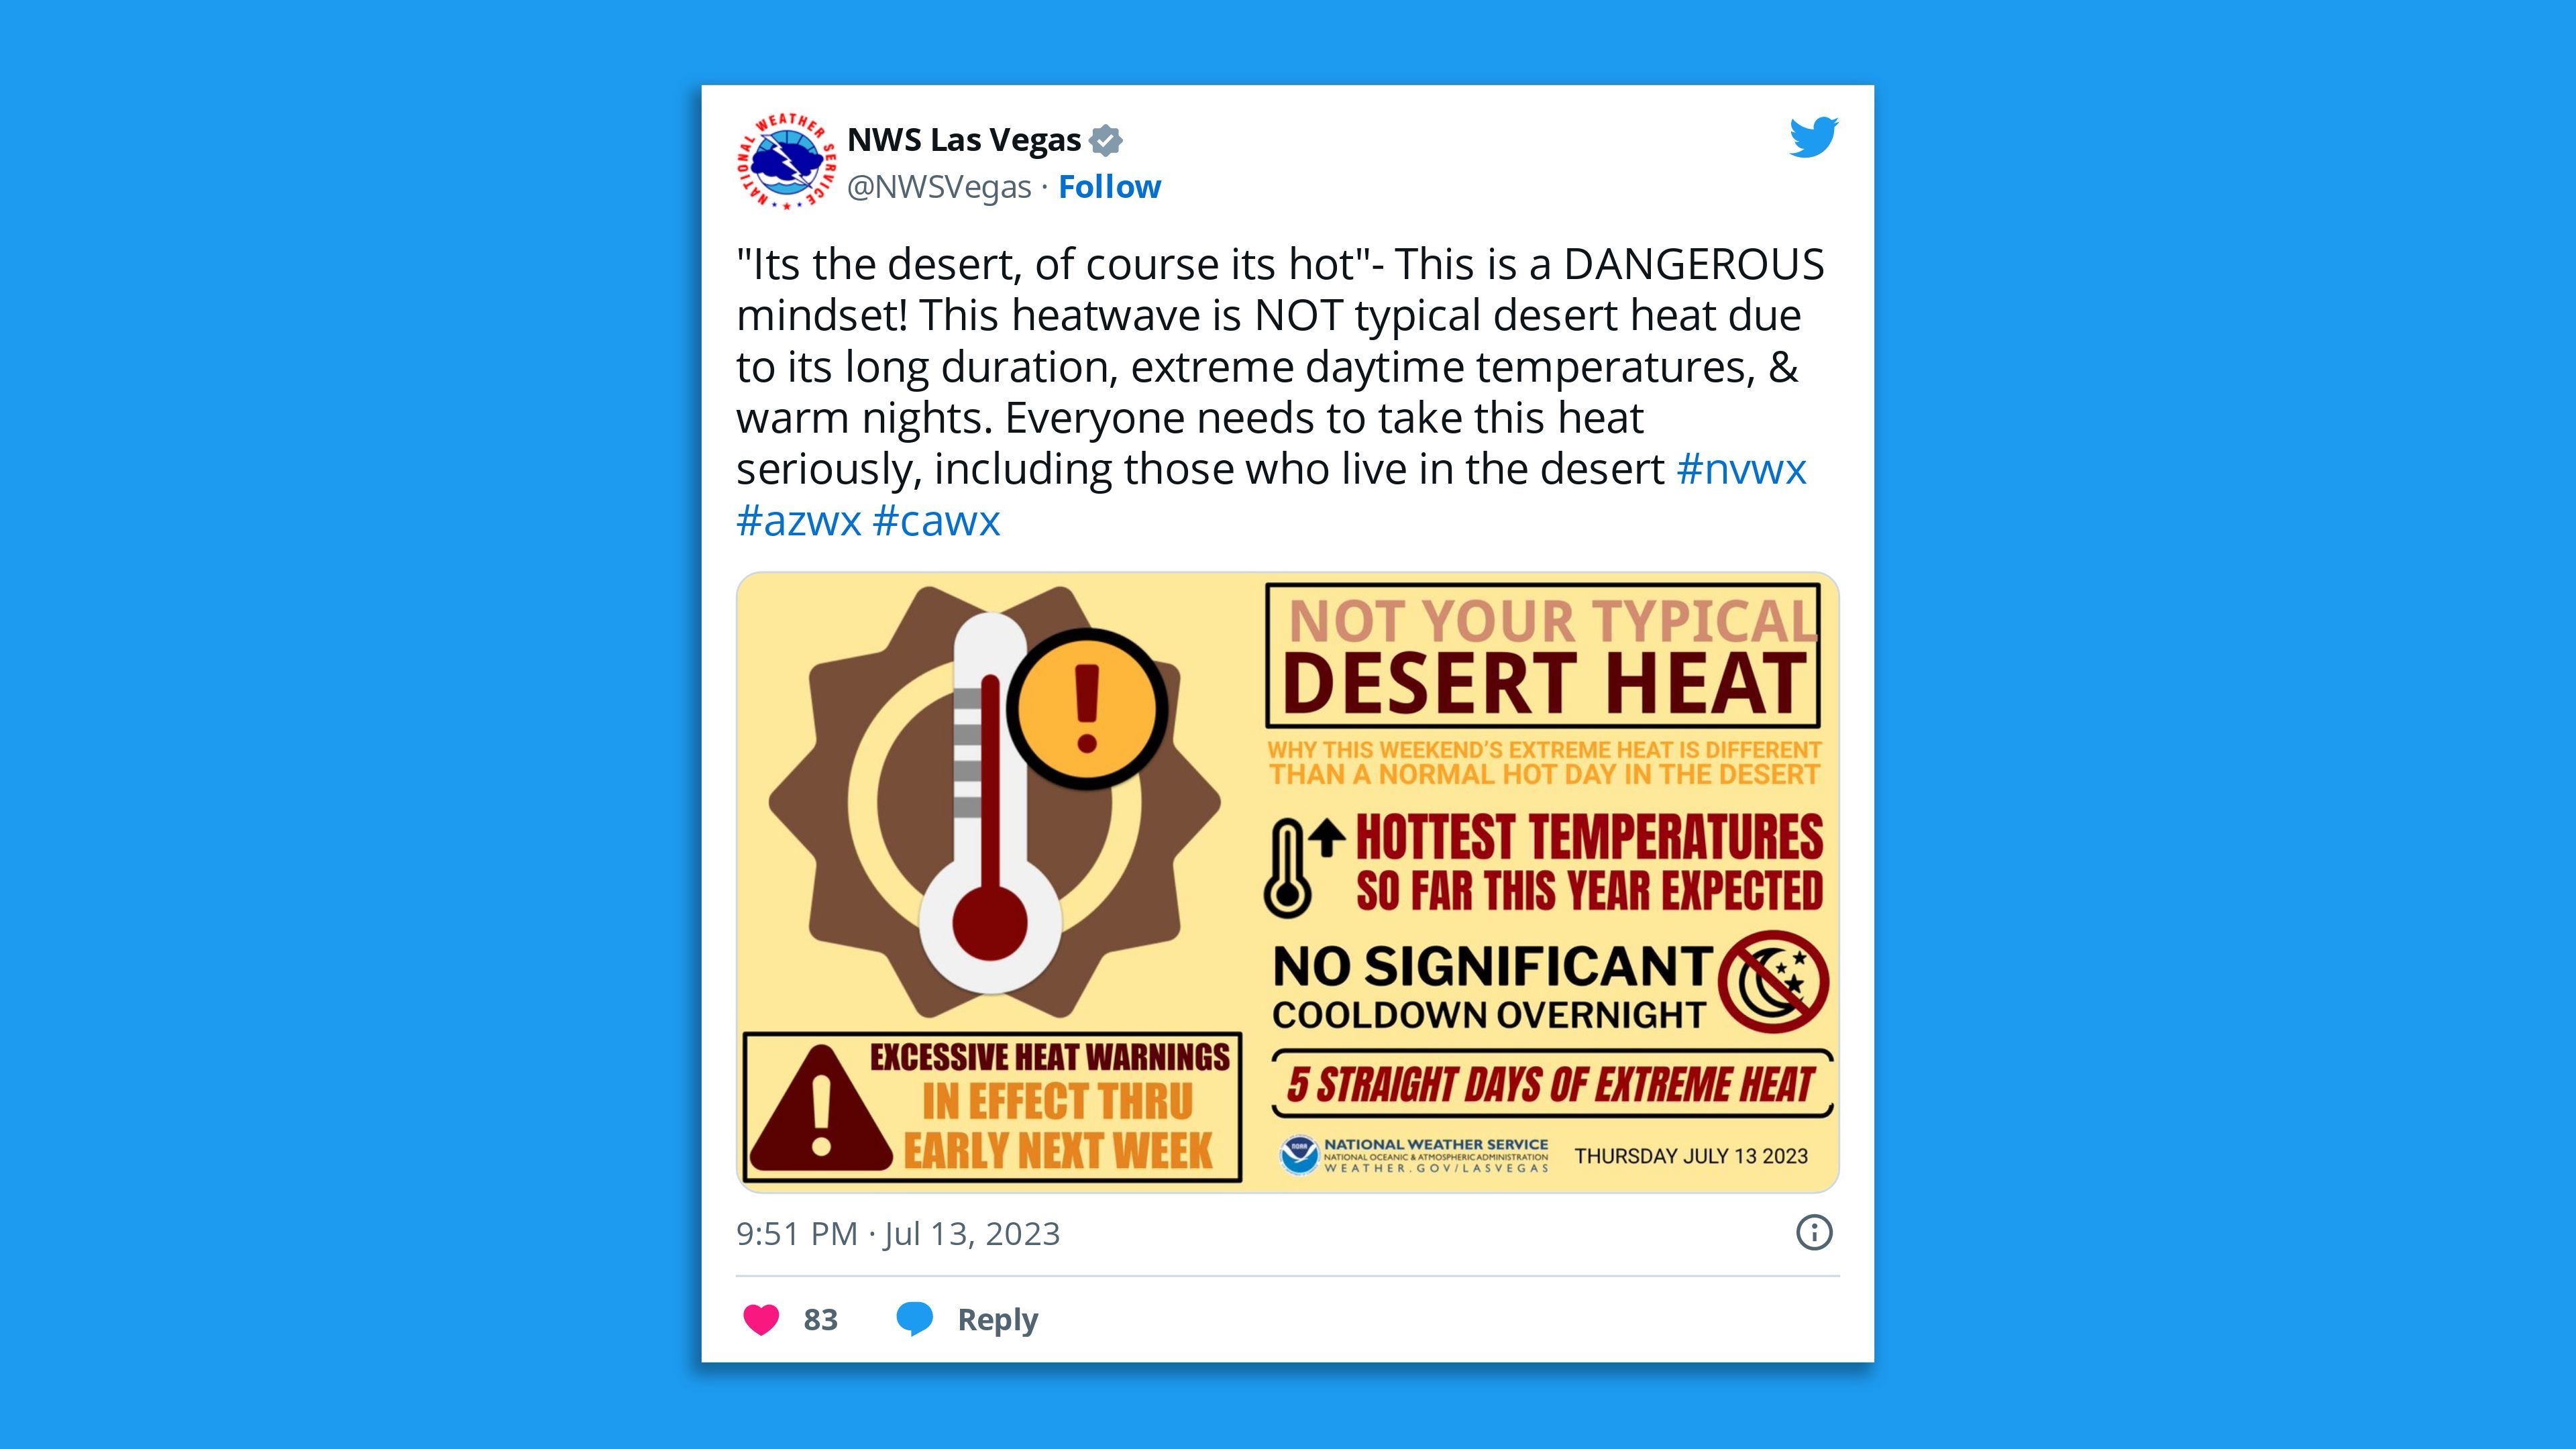 A screenshot of an NWS Las Vegas tweet saying: ""Its the desert, of course its hot"- This is a DANGEROUS mindset! This heatwave is NOT typical desert heat due to its long duration, extreme daytime temperatures, & warm nights. Everyone needs to take this heat seriously, including those who live in the desert."